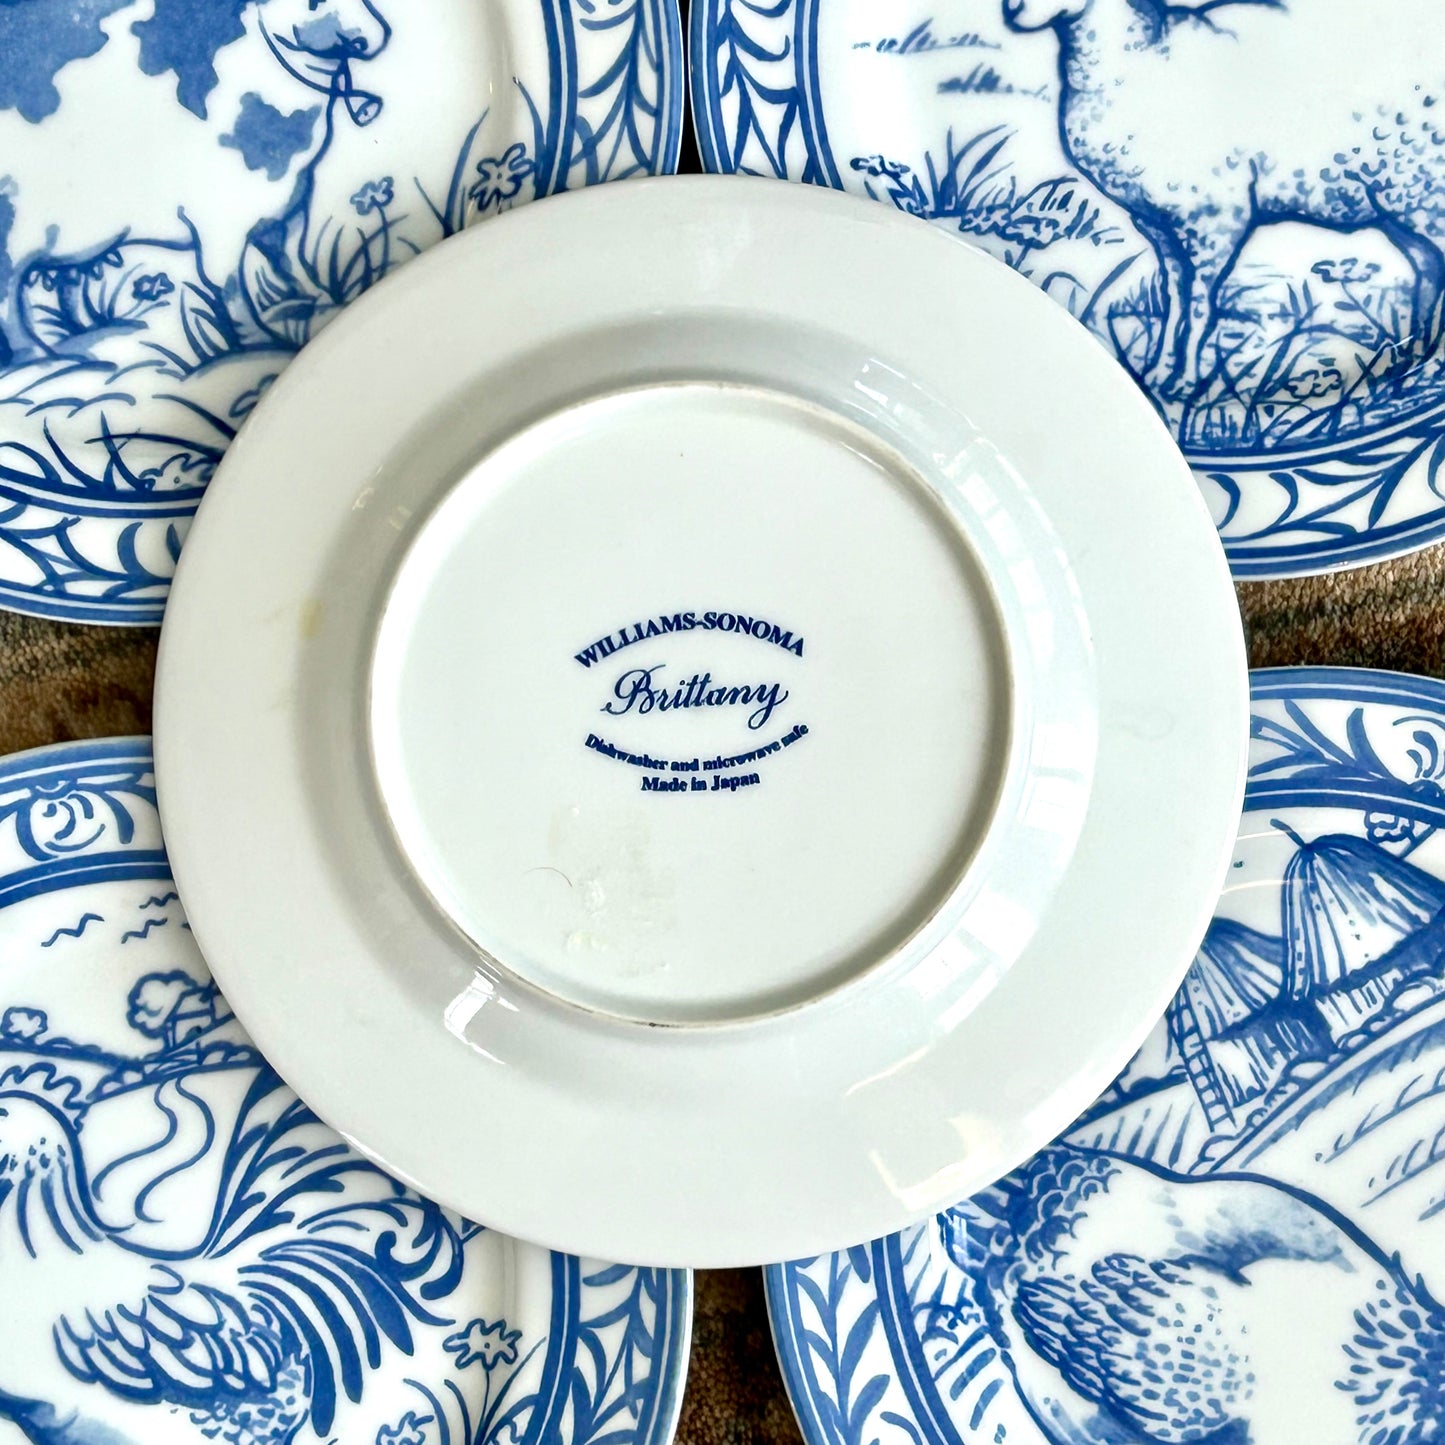 Set of 5 designer Williams-Sonoma "Brittany" blue and white country French plates